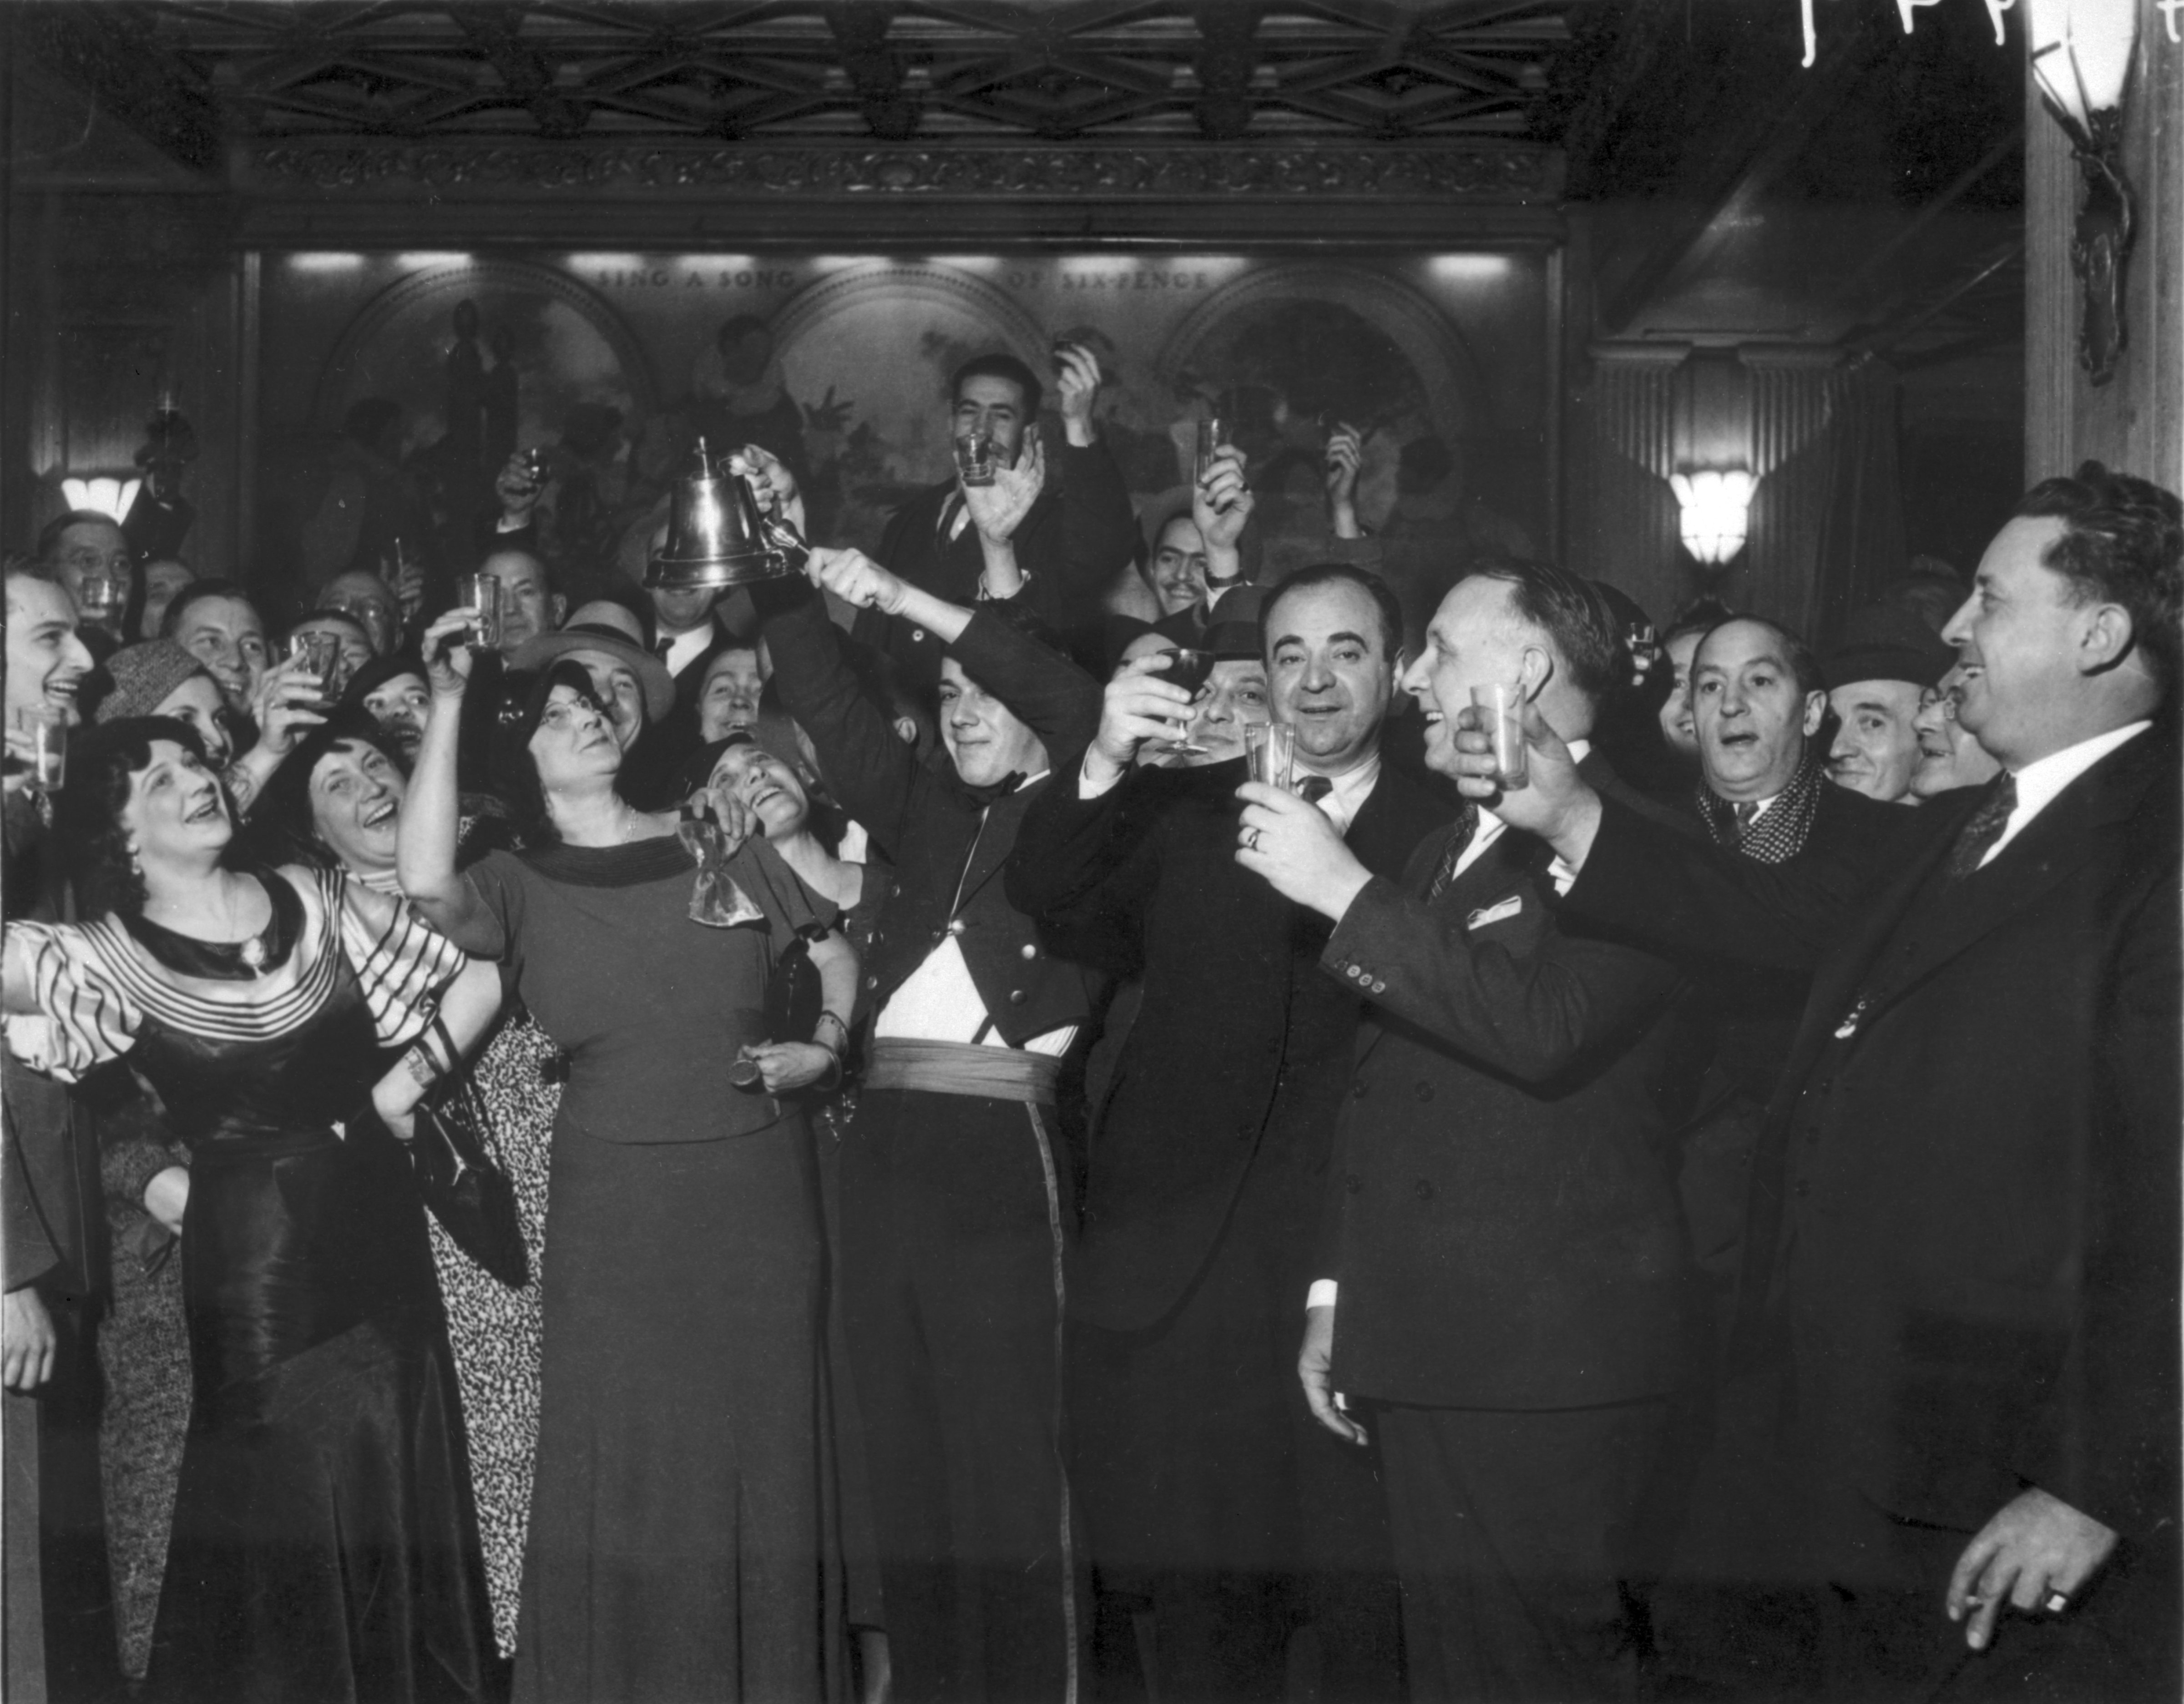 View of people raising a celebratory glass of alcohol, after the repeal of Prohibition in Chicago, 1933.  (Getty Images)